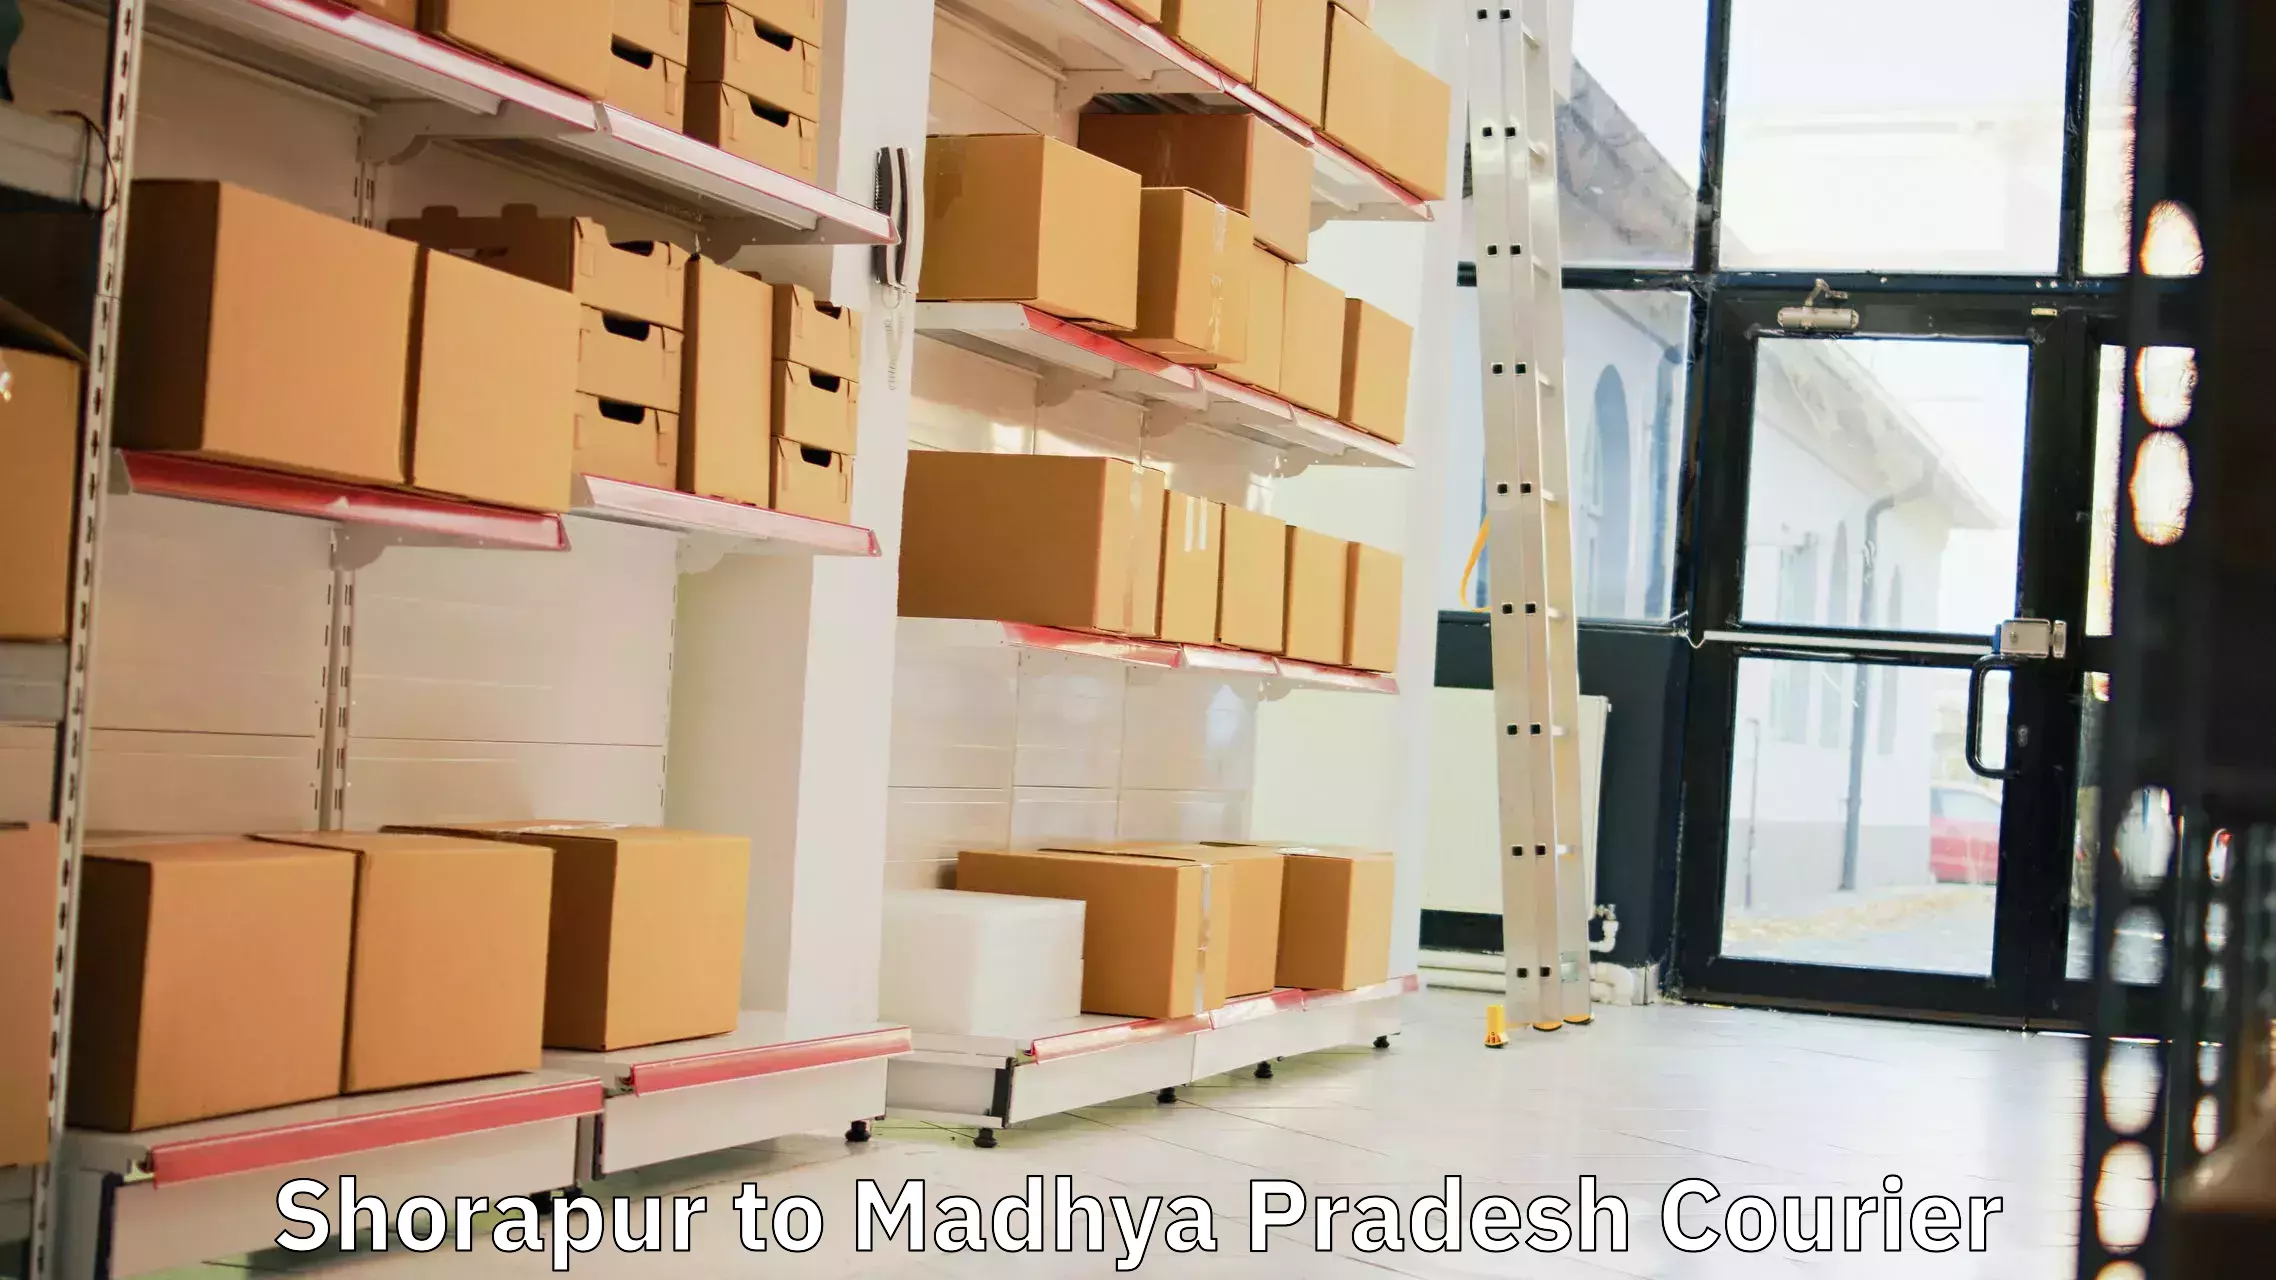 High-quality delivery services Shorapur to Mandideep